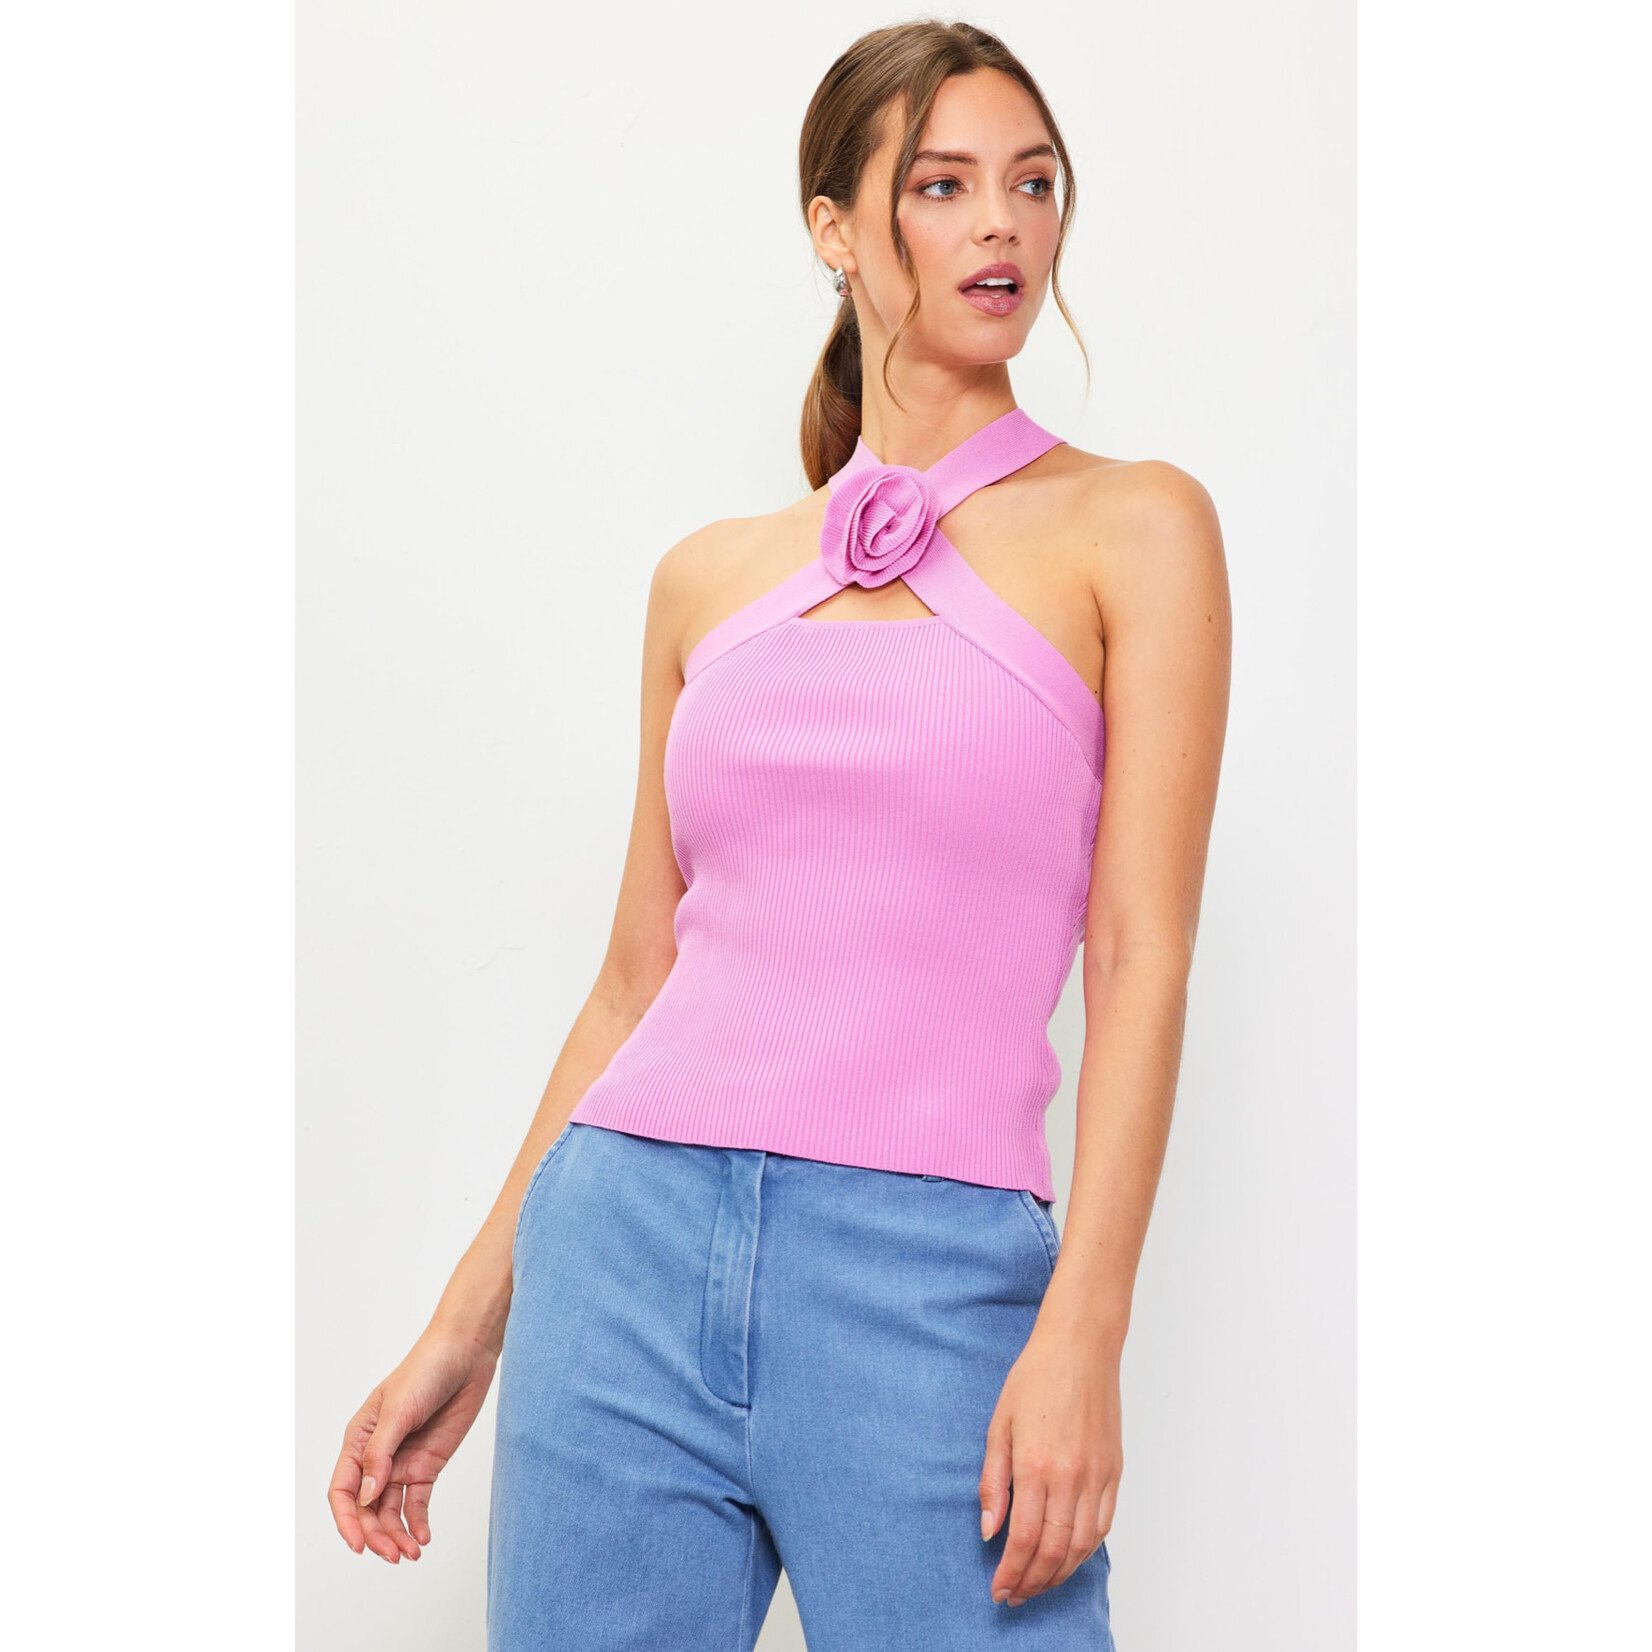 The Rosette Top